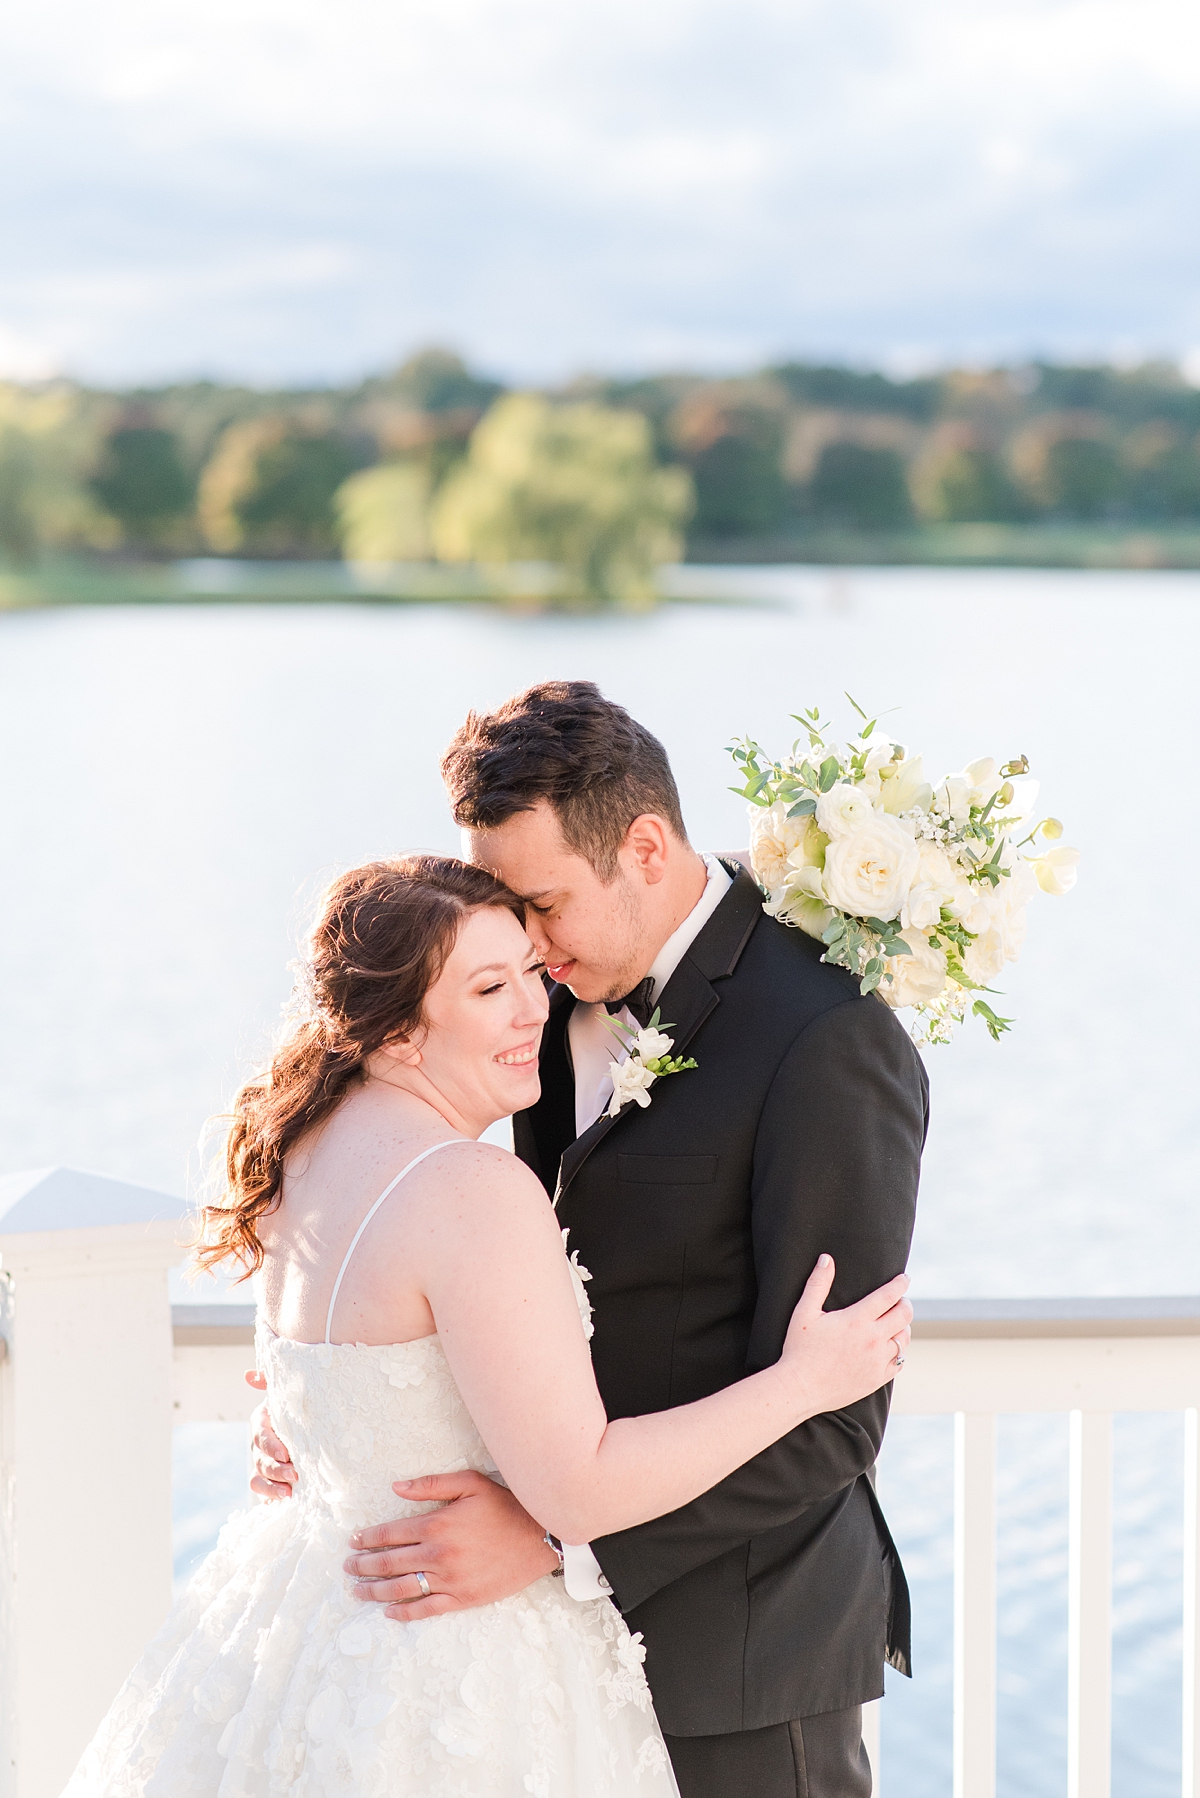 Bride and Groom Lakeside Portraits at Dominion Club Fall Wedding. Wedding Photography by Richmond Wedding Photographer Kailey Brianne Photography.